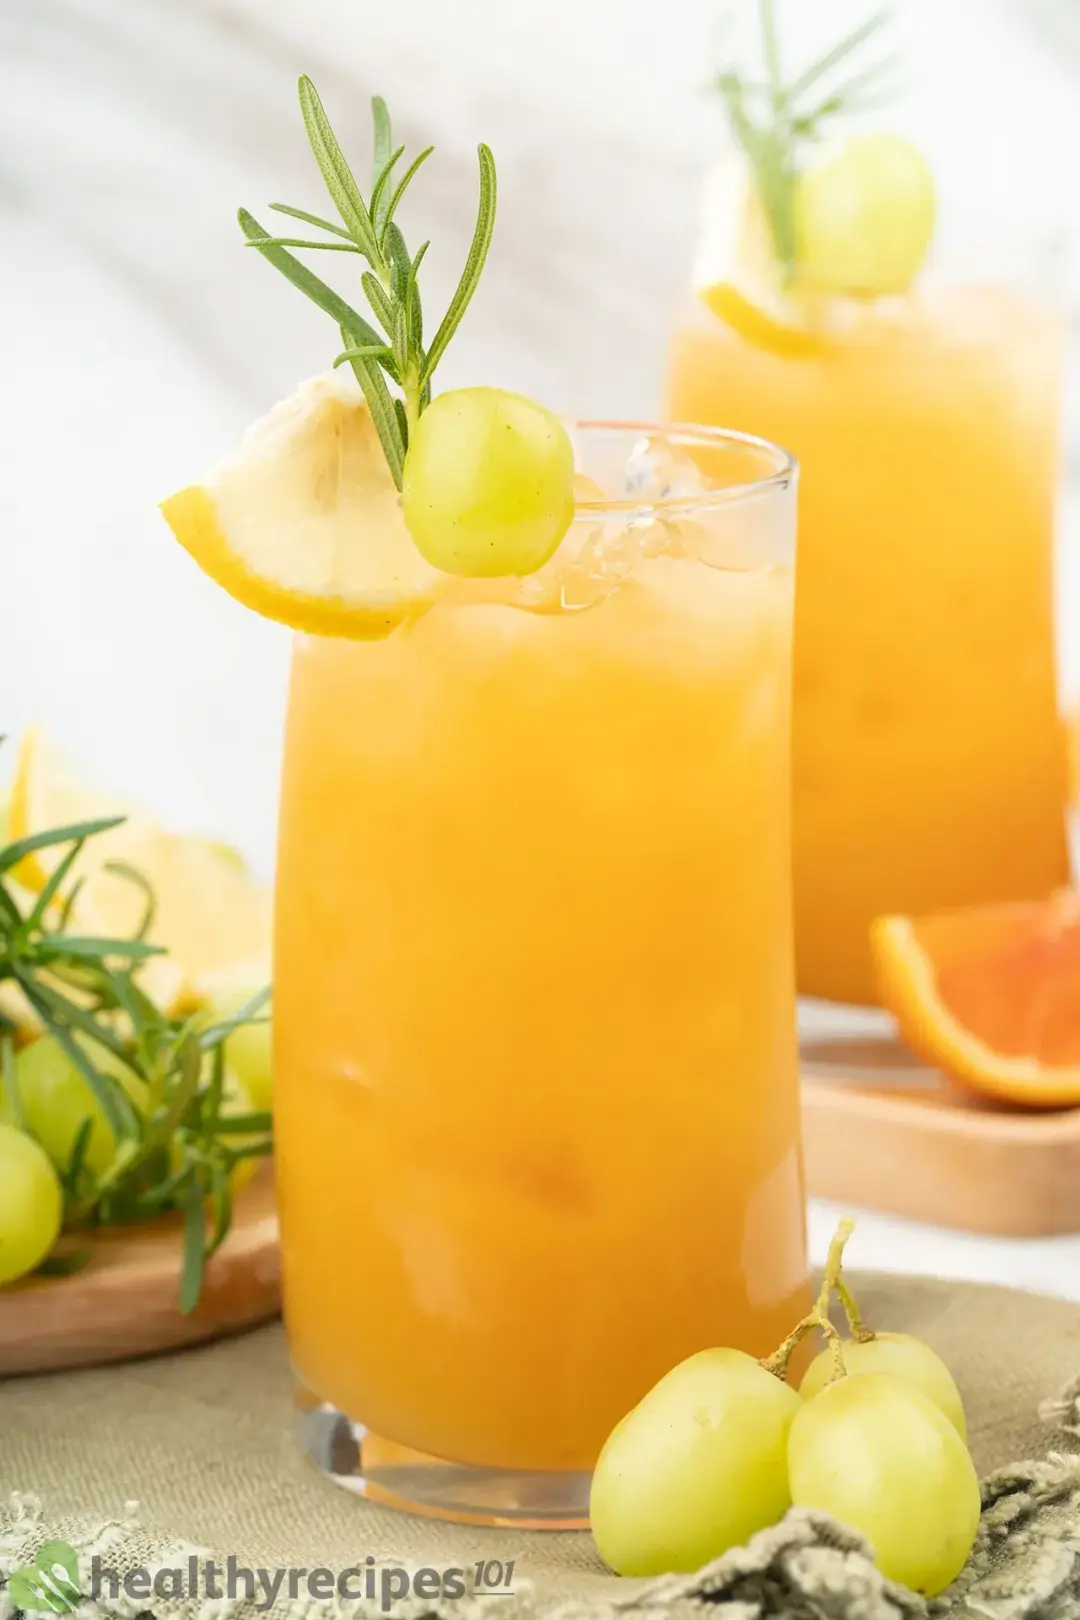 Glasses of grapefruit drink with ice, garnished with rosemary, grape, a lemon wedge, and whole grapes on the side